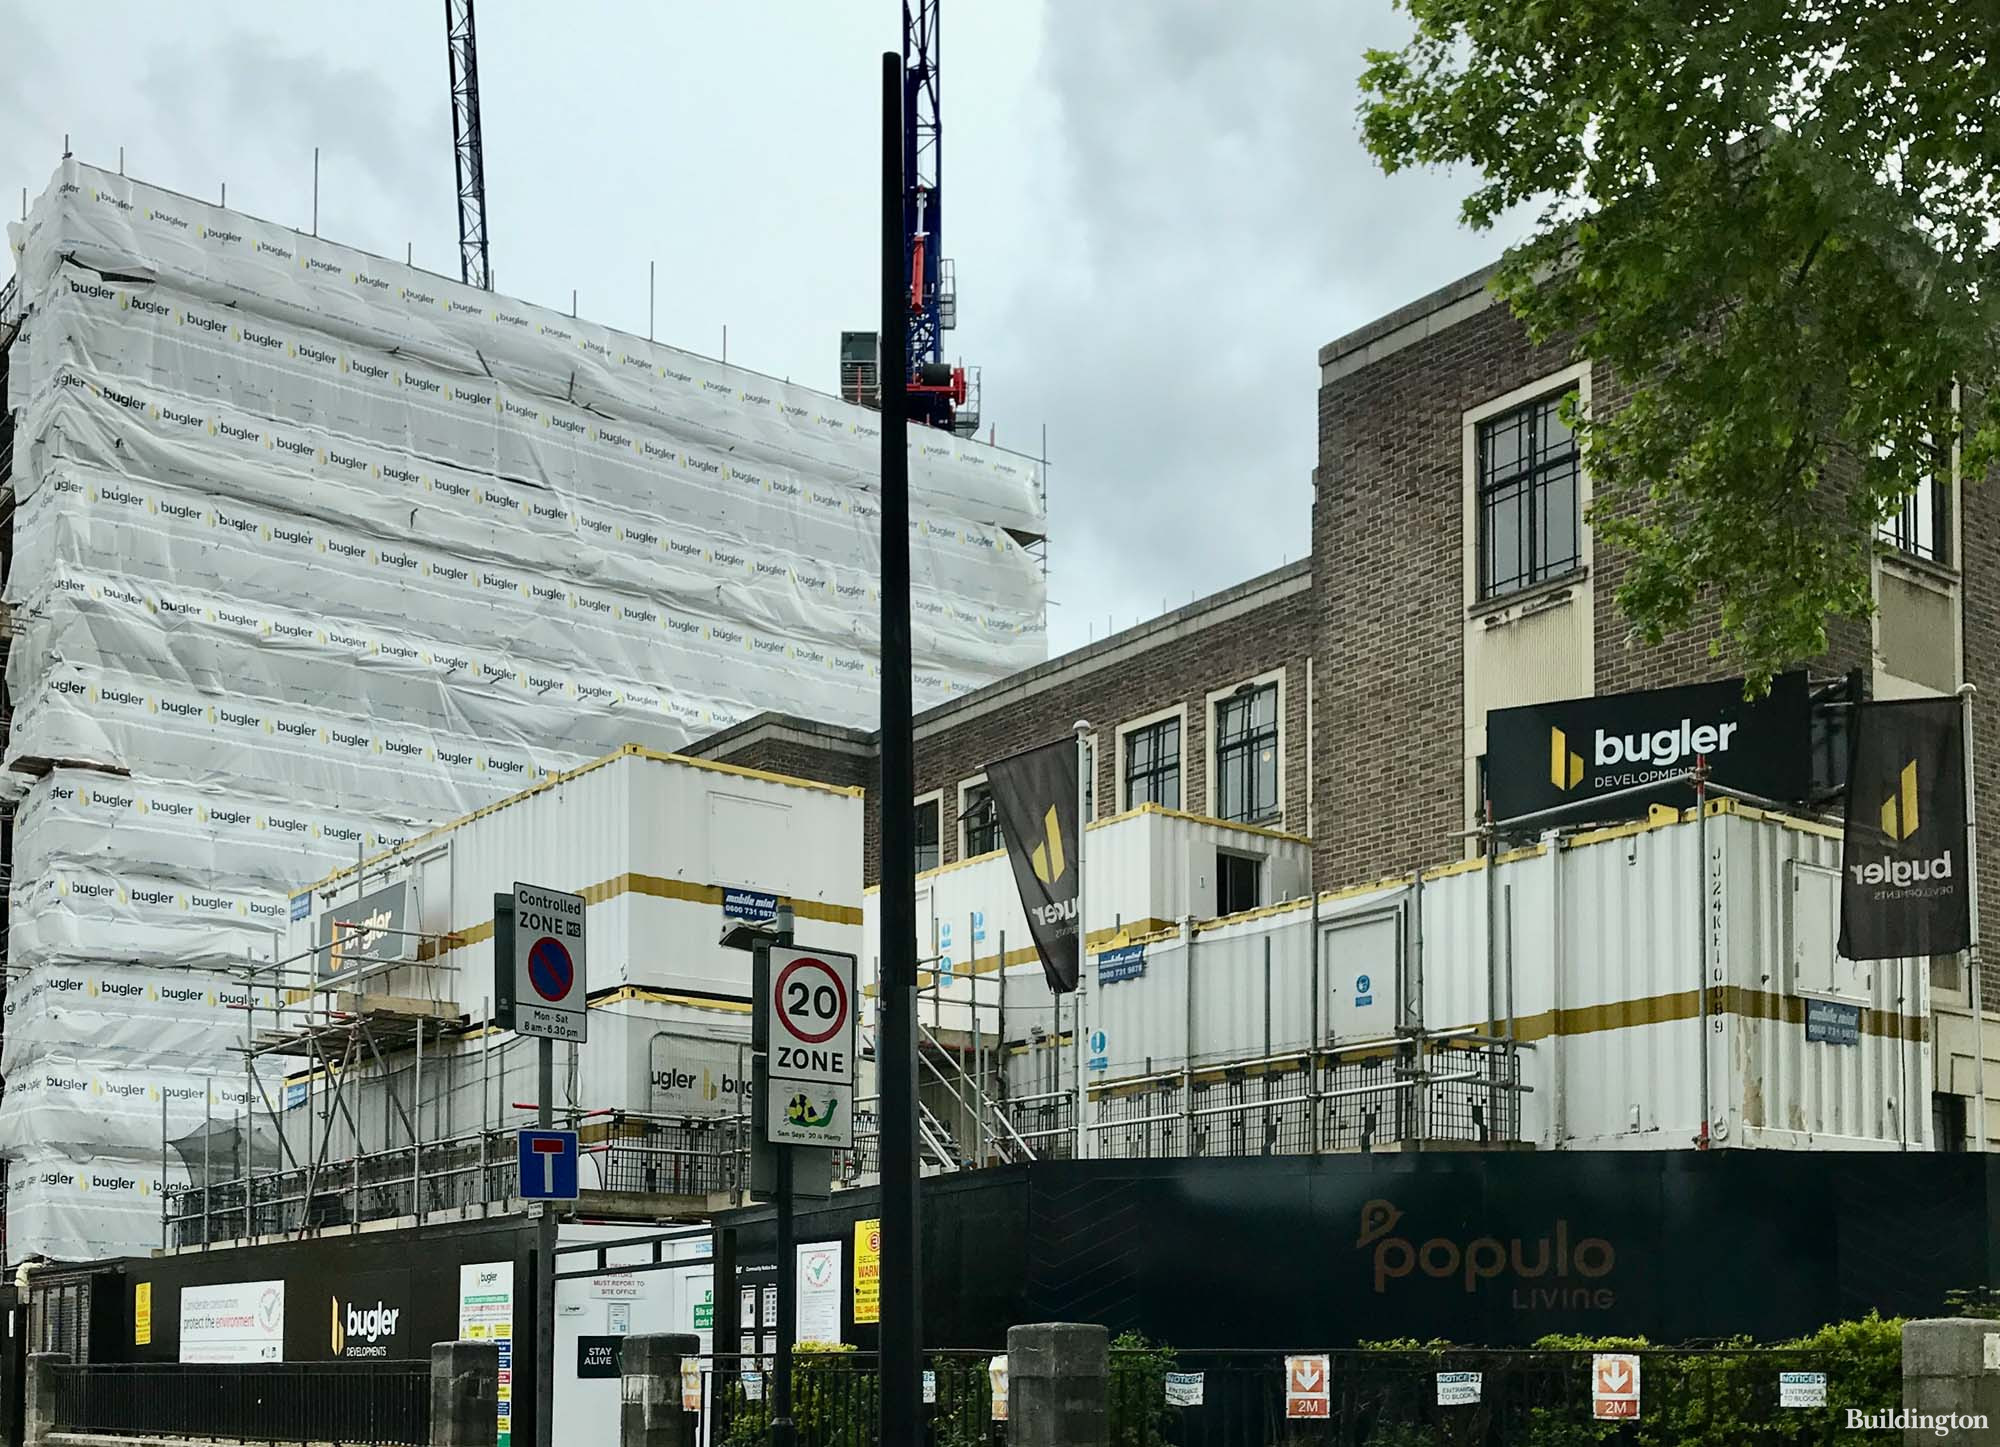 The Didsbury under construction in East Ham.